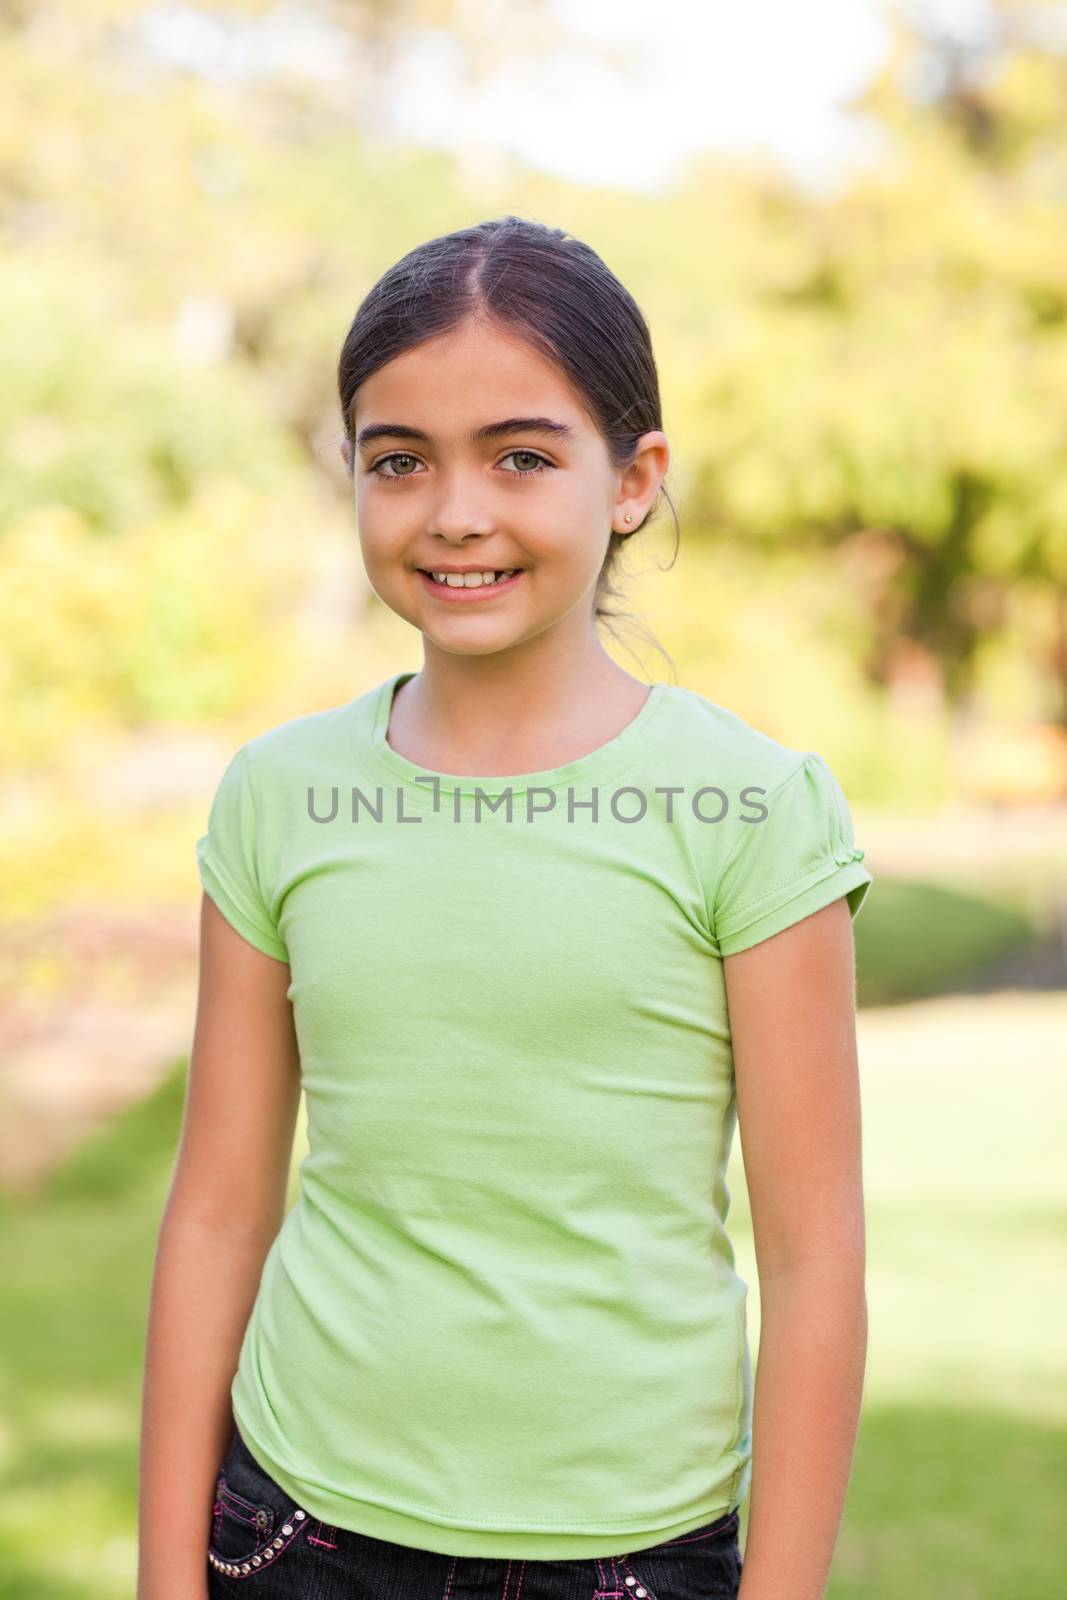 Cute girl in the park during the summer